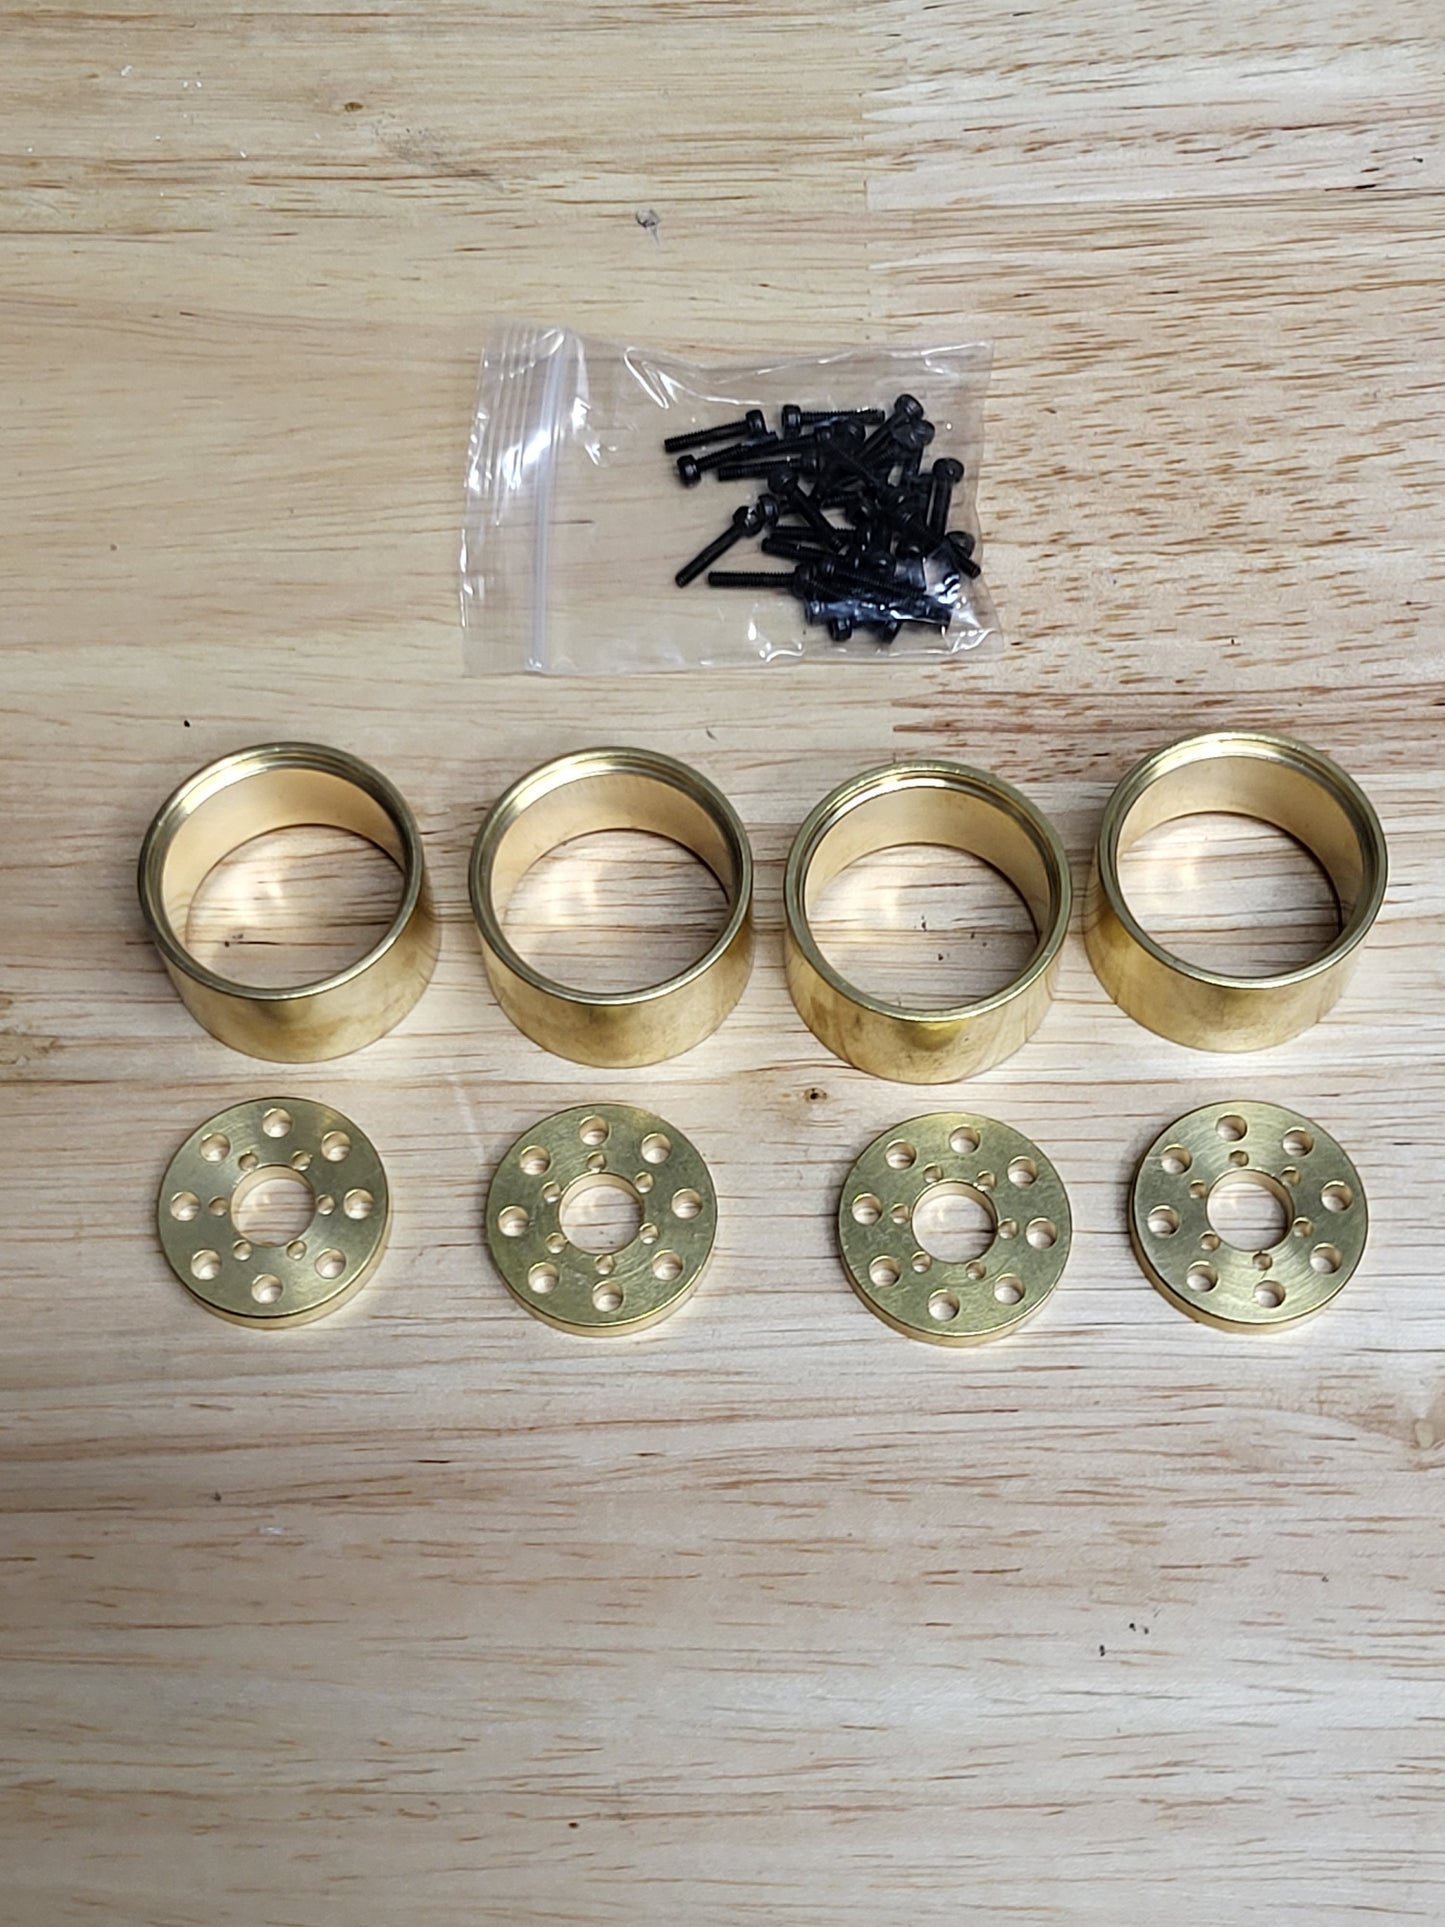 Island style wheel spacers and rings For UPW and DDP wheels, brass or aluminum